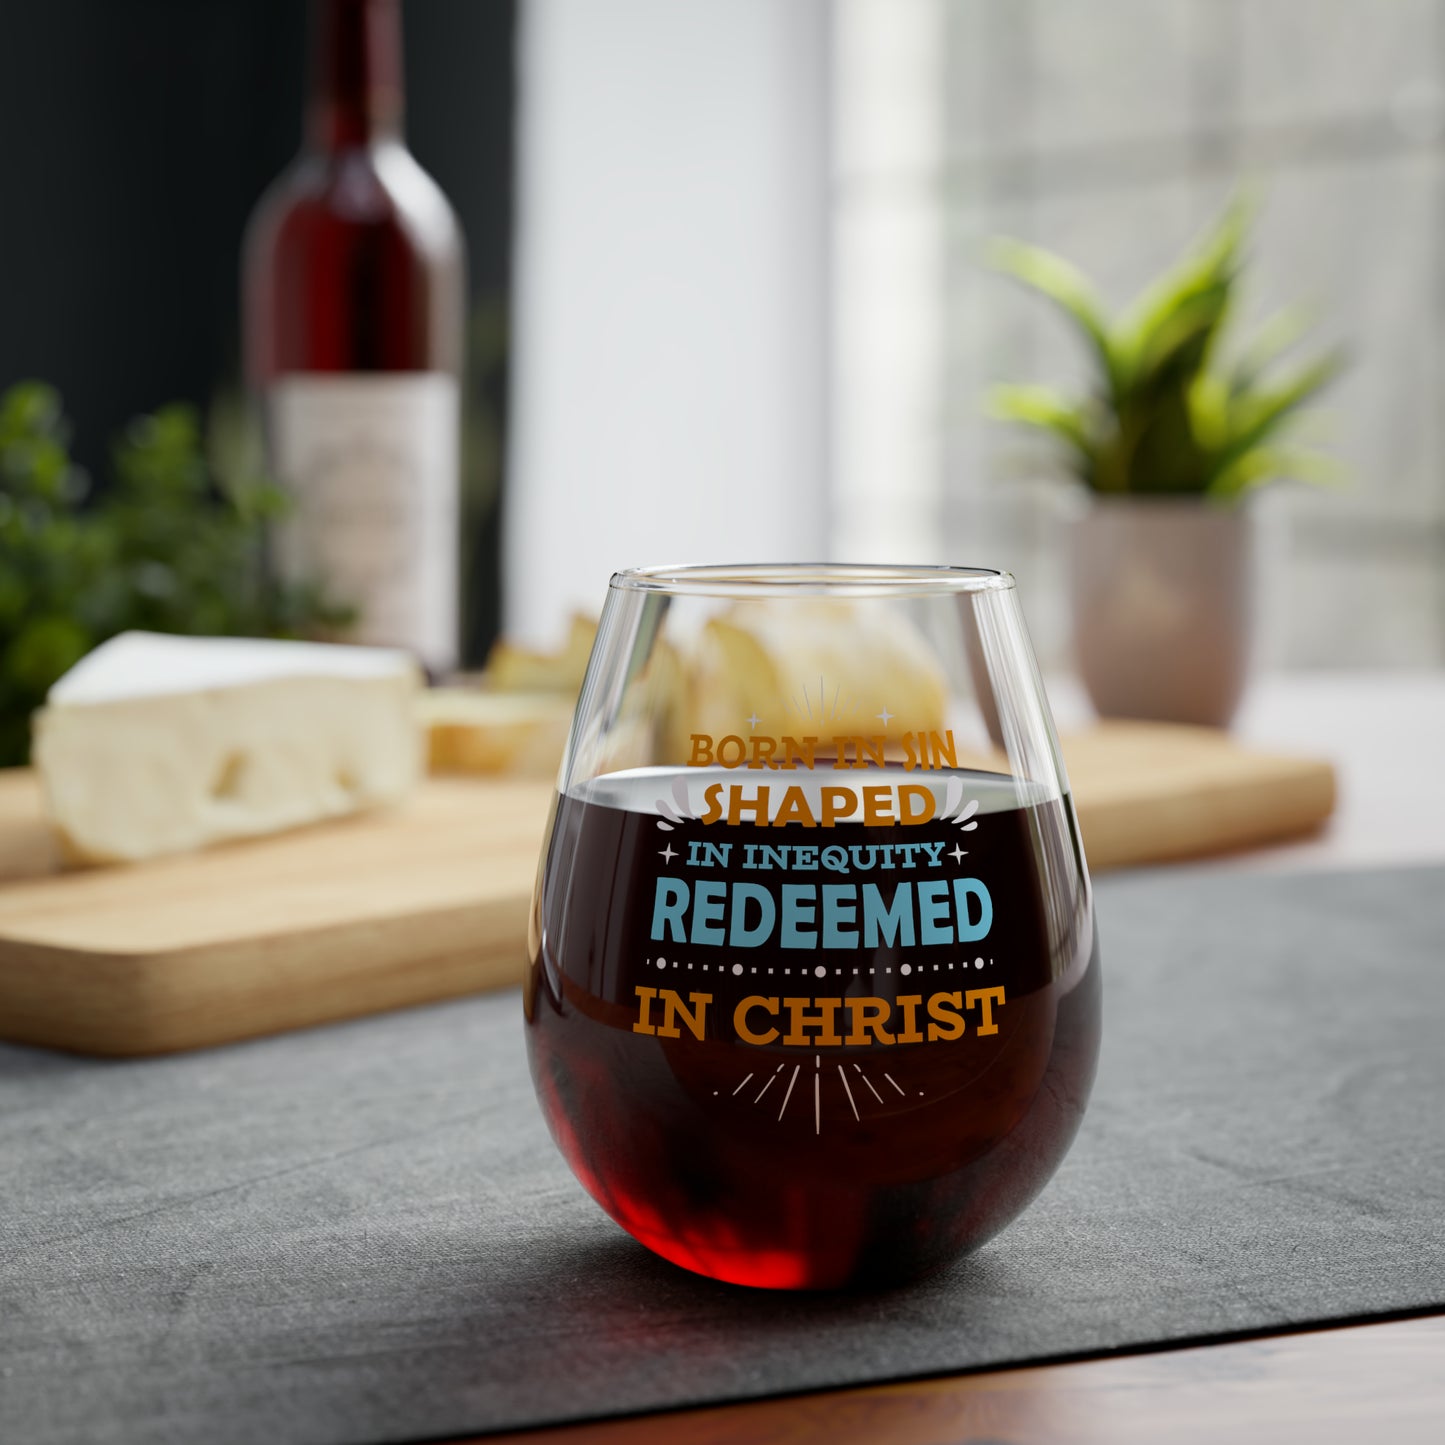 Born In Sin Shaped In Inequity Redeemed In Christ Stemless Wine Glass, 11.75oz